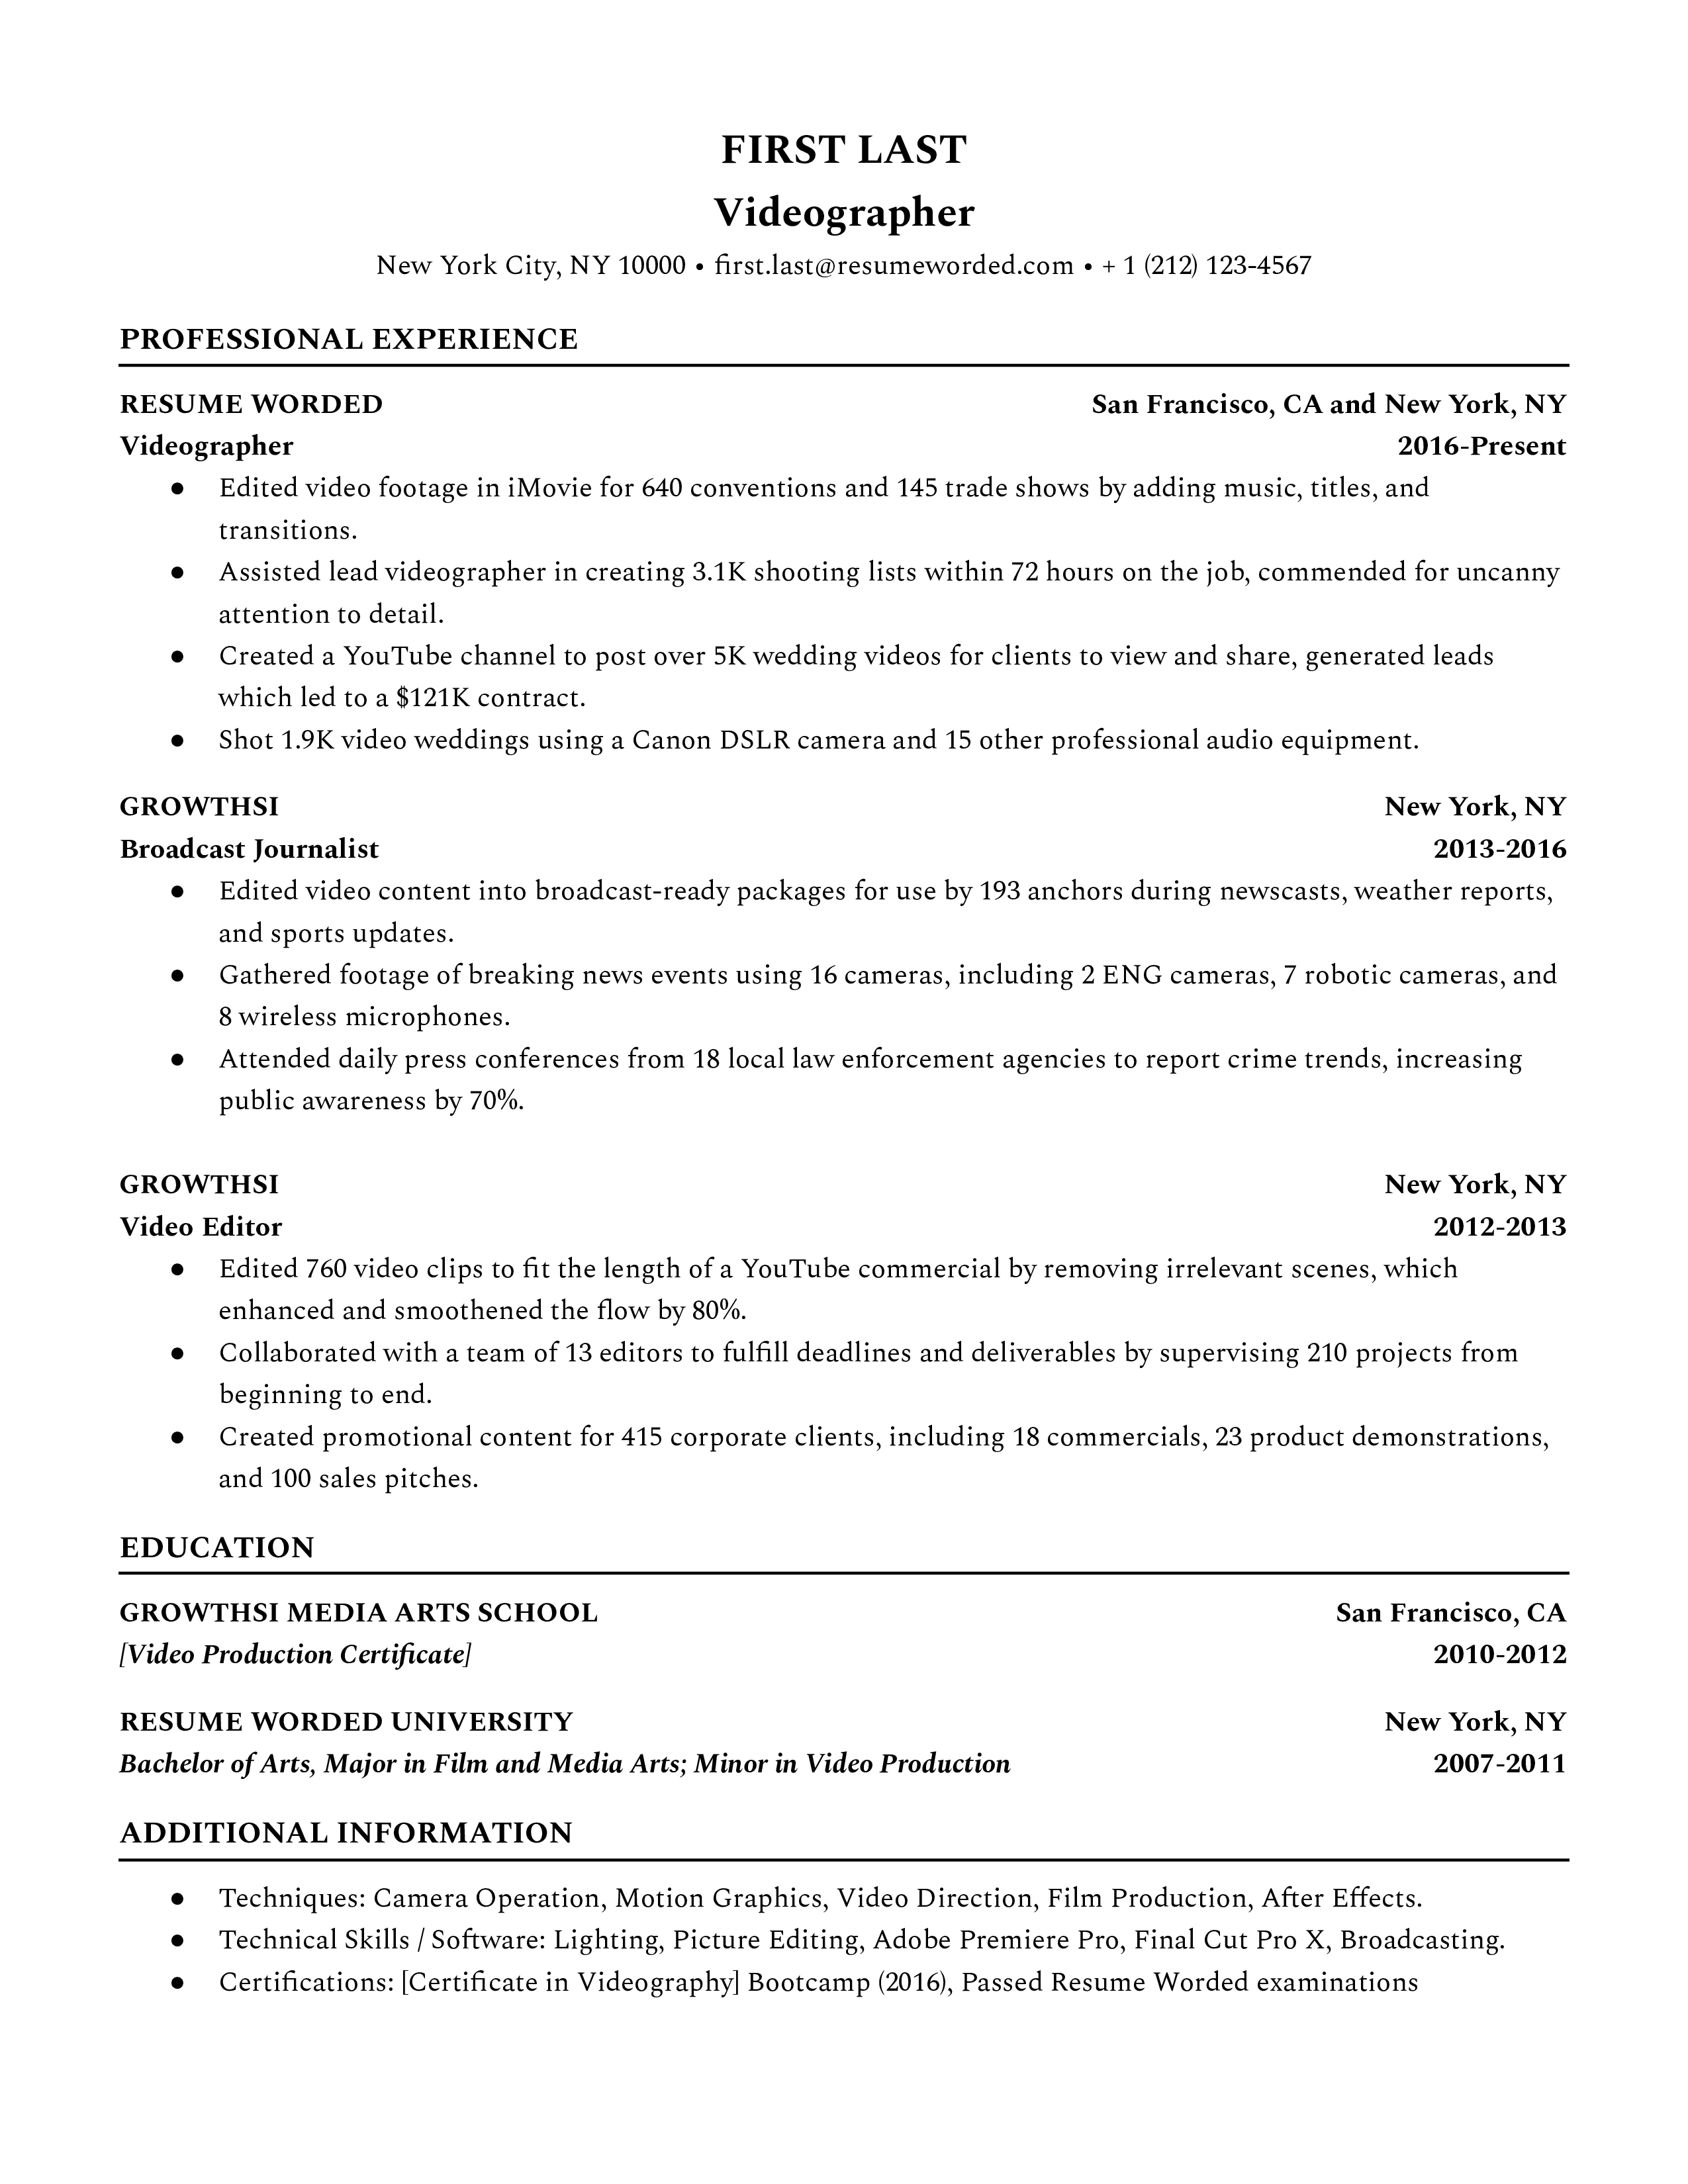 A videographer resume template that emphasizes relevant work experience. 